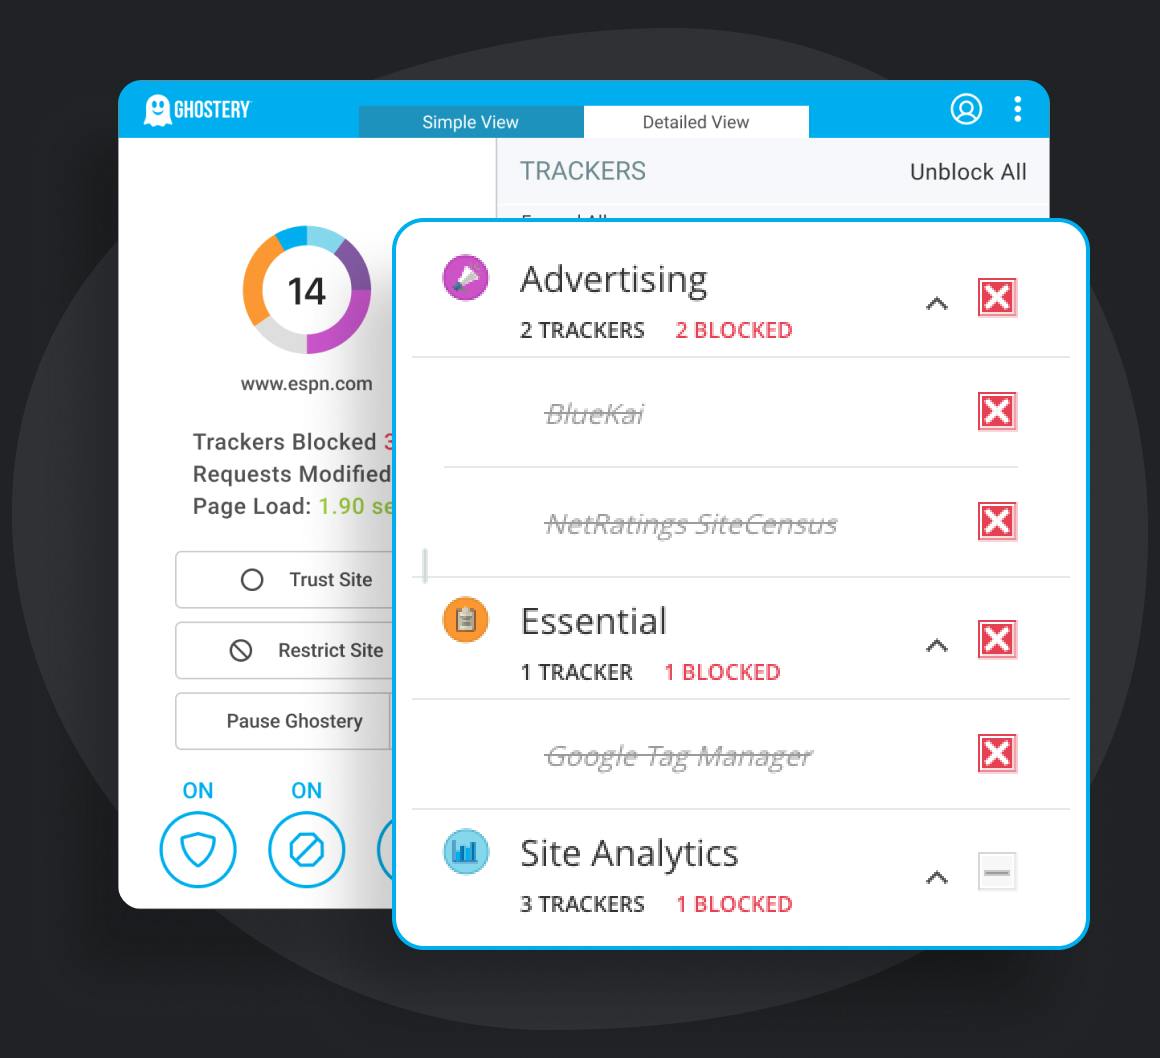 Ghostery Tracker & Ad Blocker panel detailed view displaying settings and blocked trackers